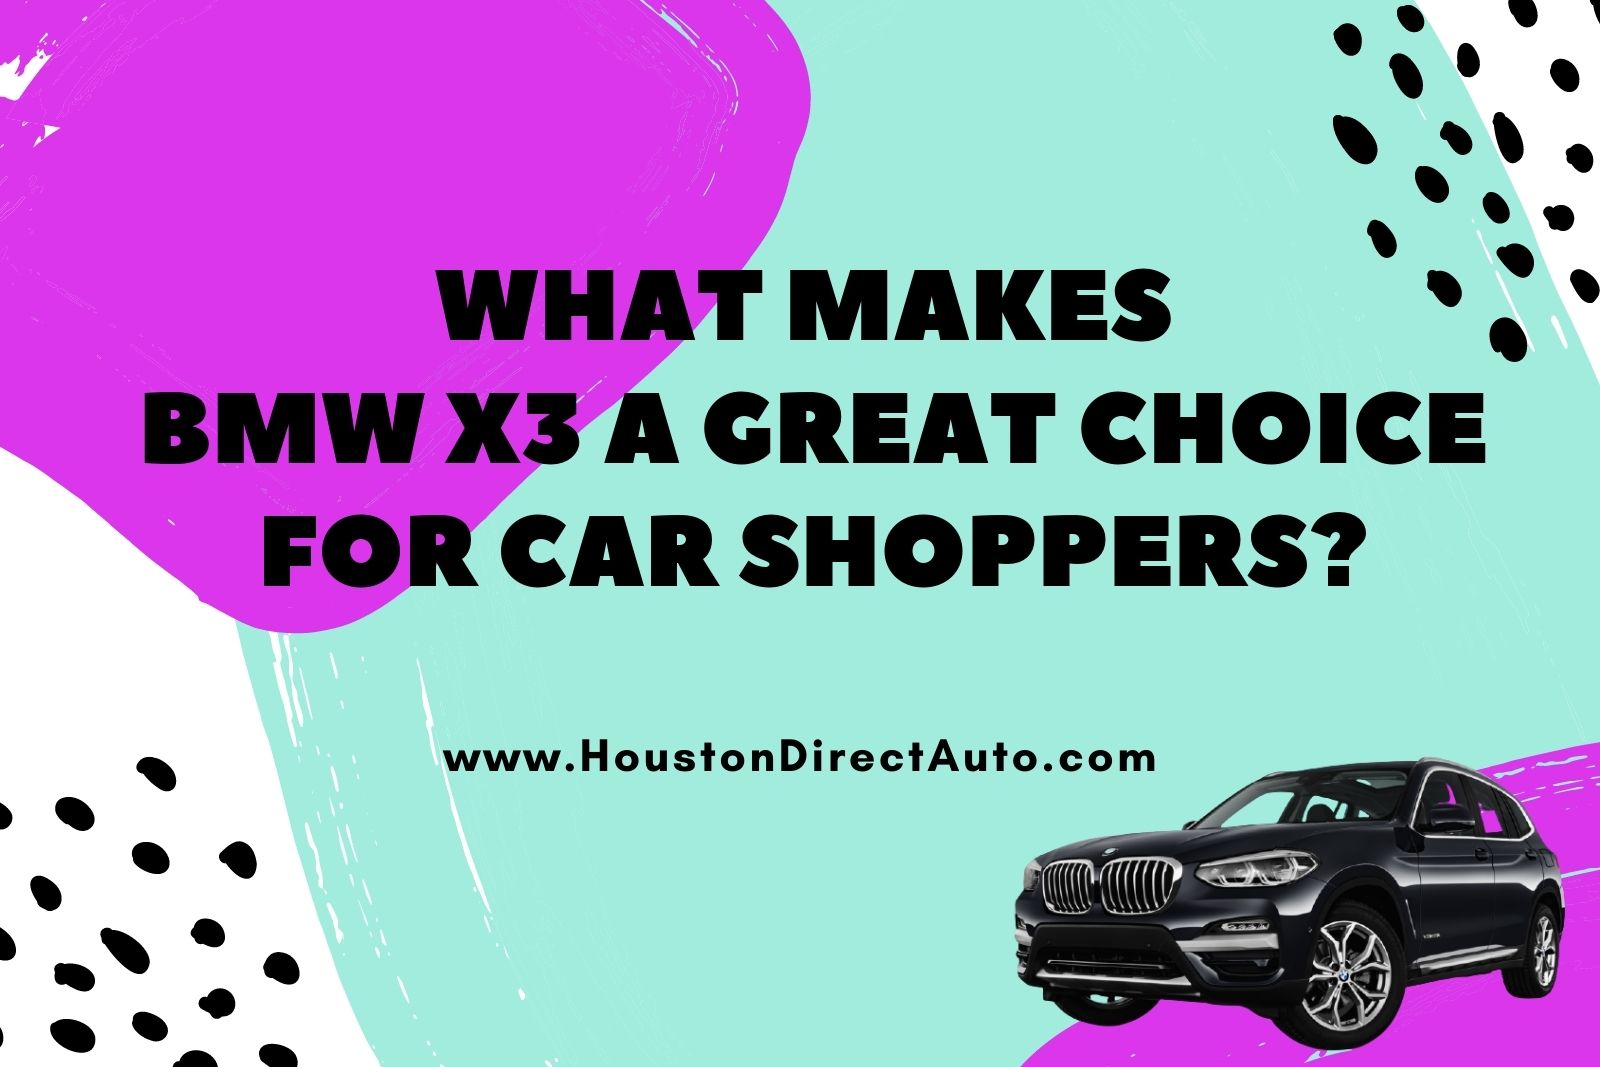 What Makes BMW For Sale - BMW X3 A Great Choice For Car Shoppers?